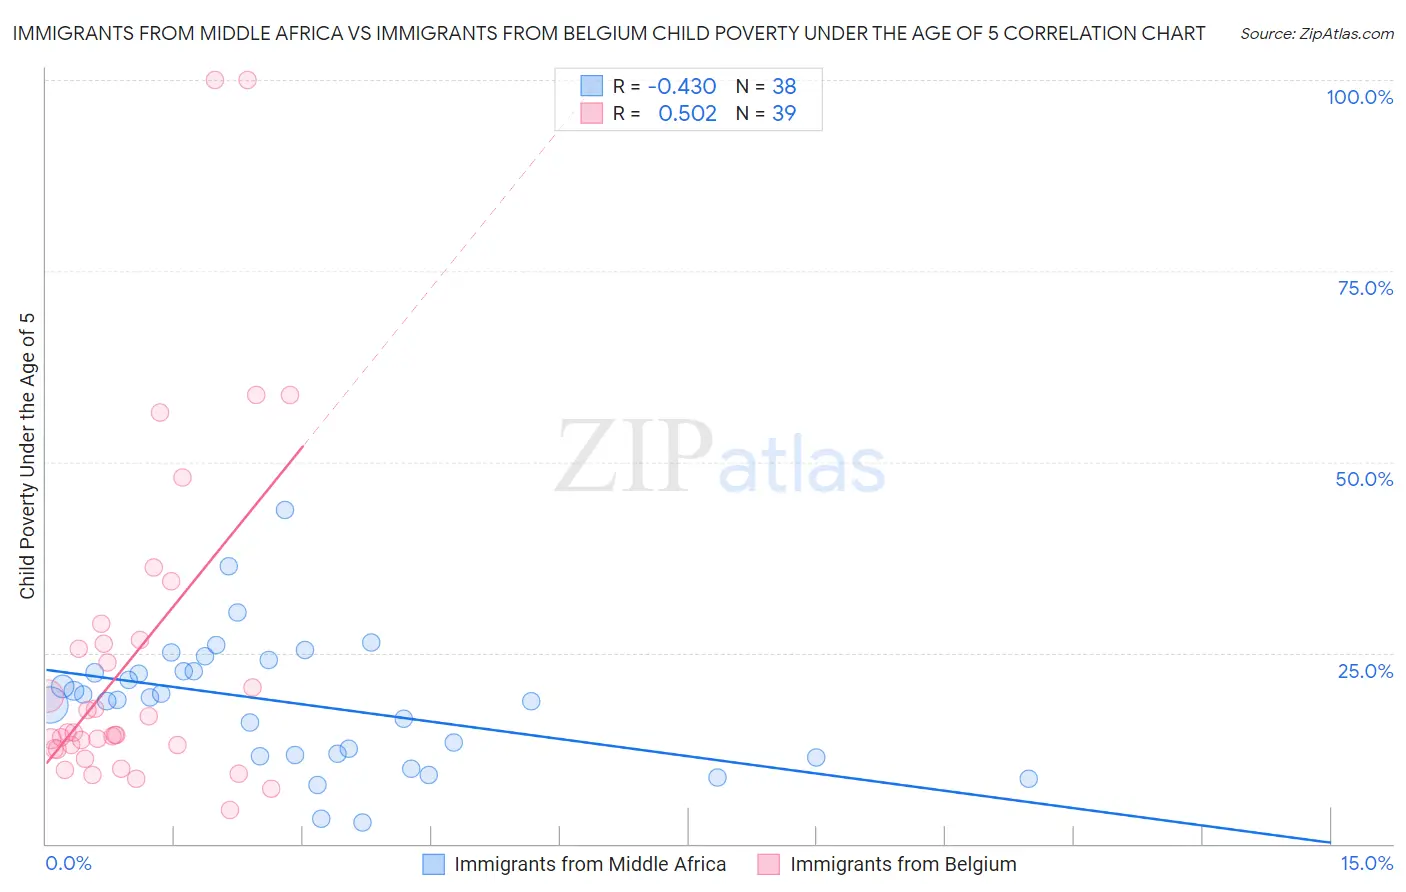 Immigrants from Middle Africa vs Immigrants from Belgium Child Poverty Under the Age of 5